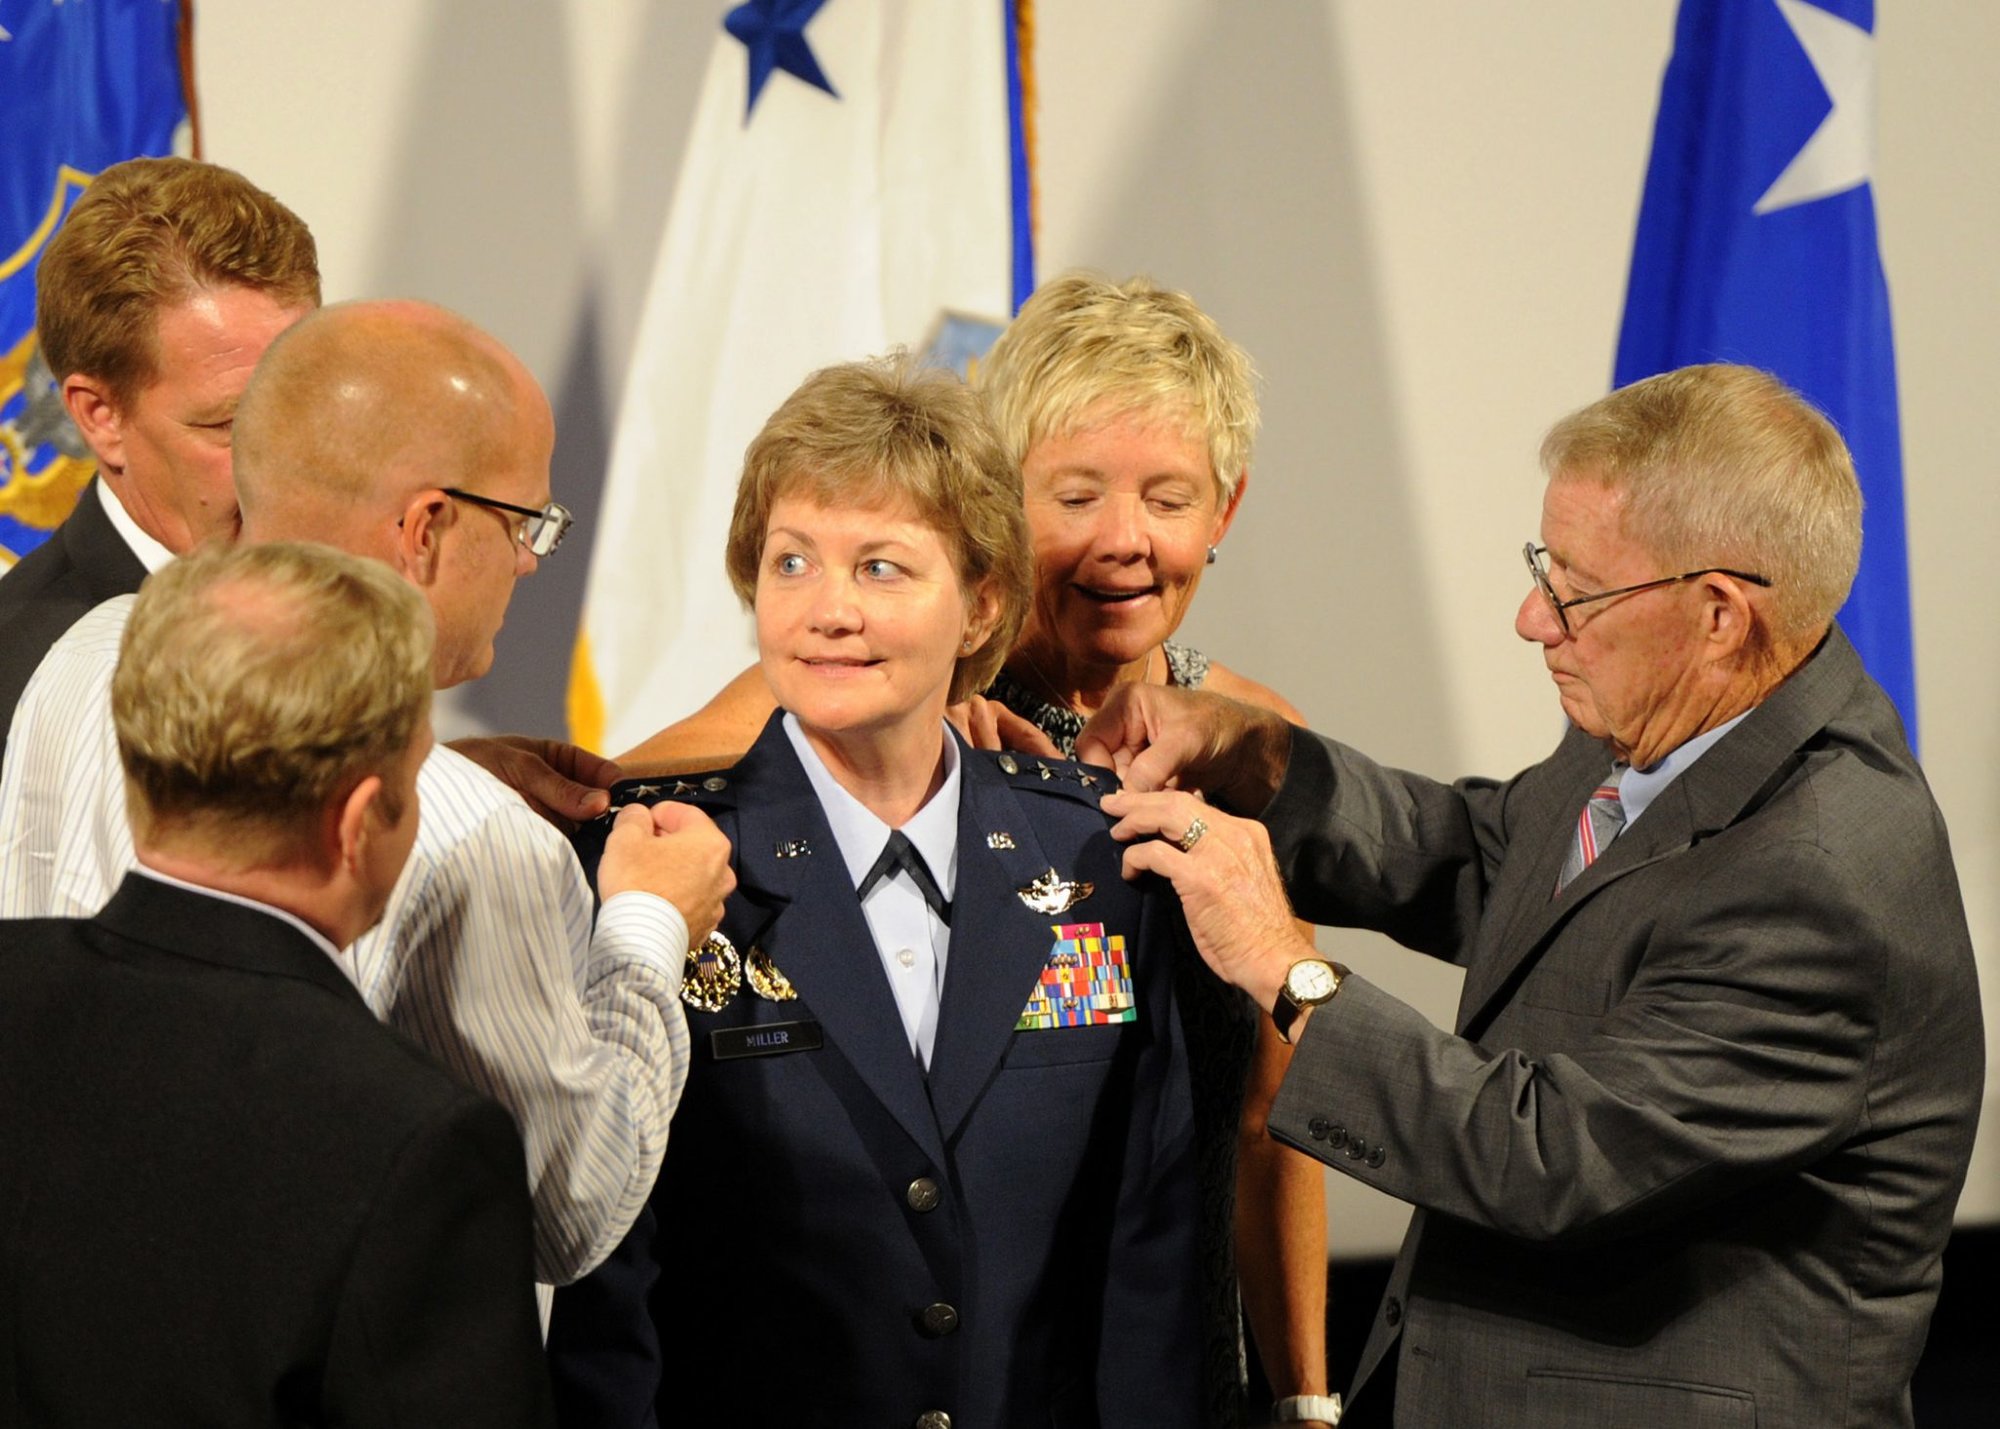 US Air Force Maj. Gen. Maryanne Miller receives her third star July 15, 2016. US Air Force photo by Tech. Sgt. Stephen D. Schester, courtesy of DVIDS. (promotion of female generals army dod)